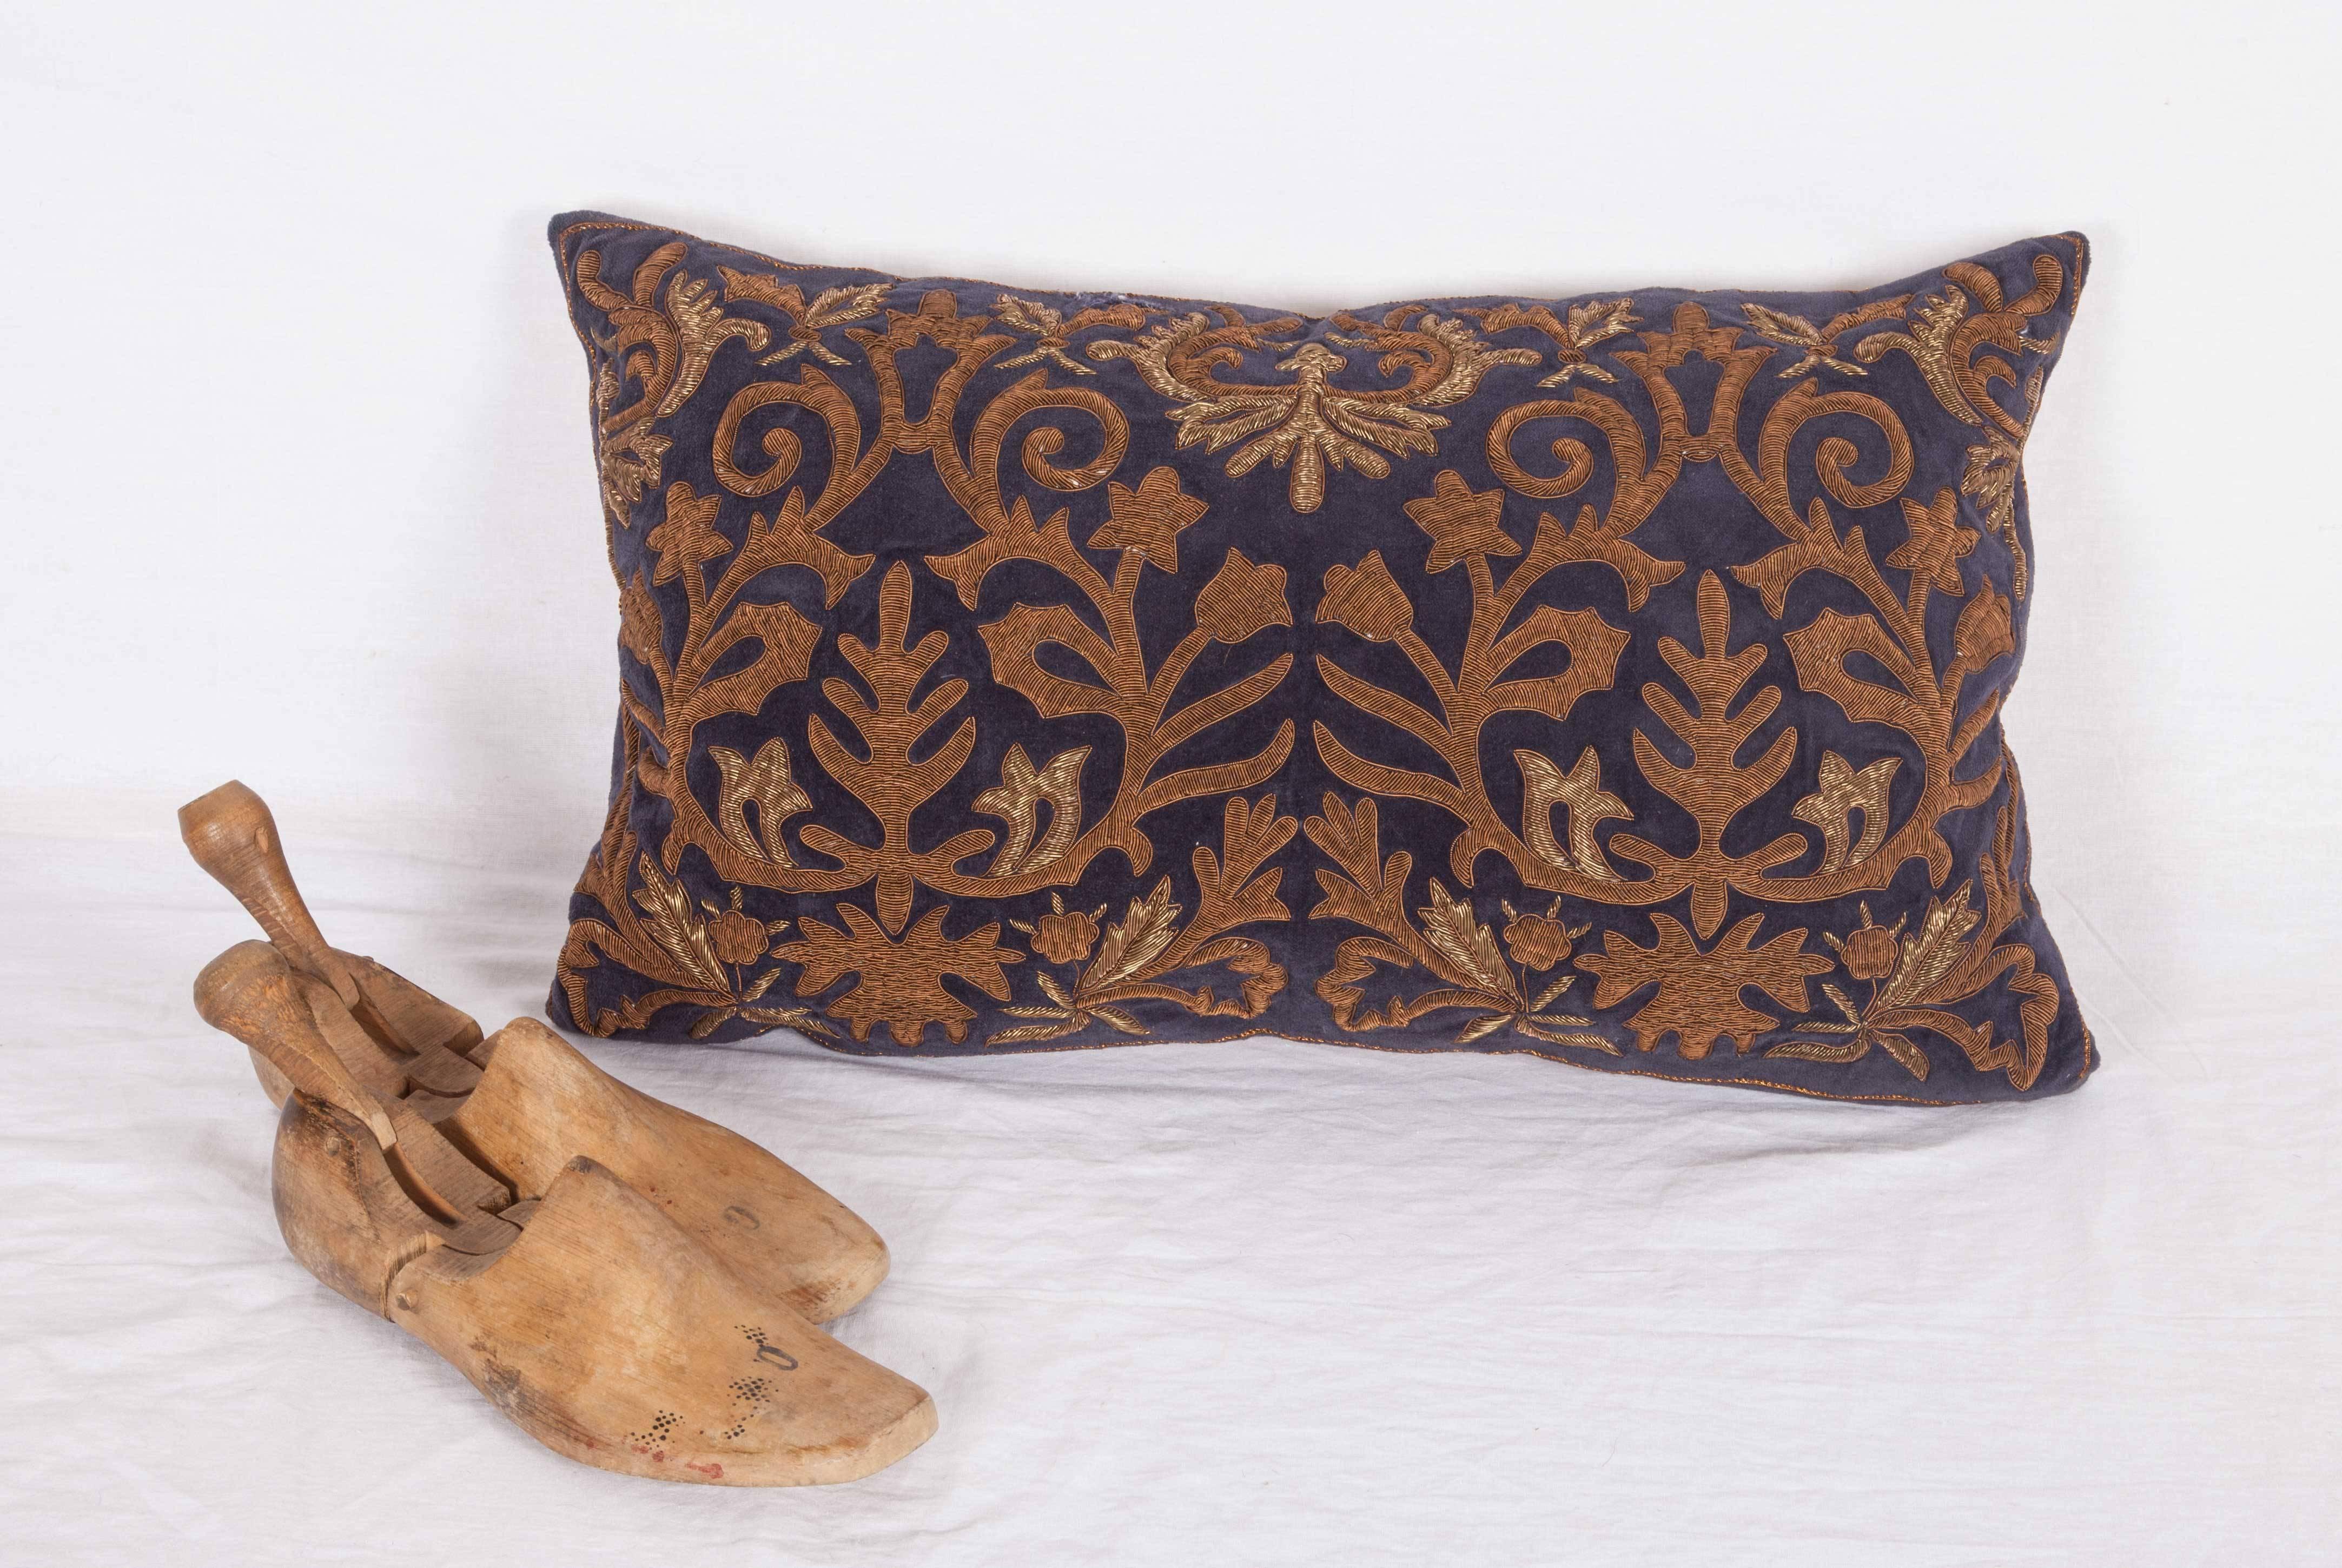 French Antique Pillow Case Made from a 19th Century European Embroidery